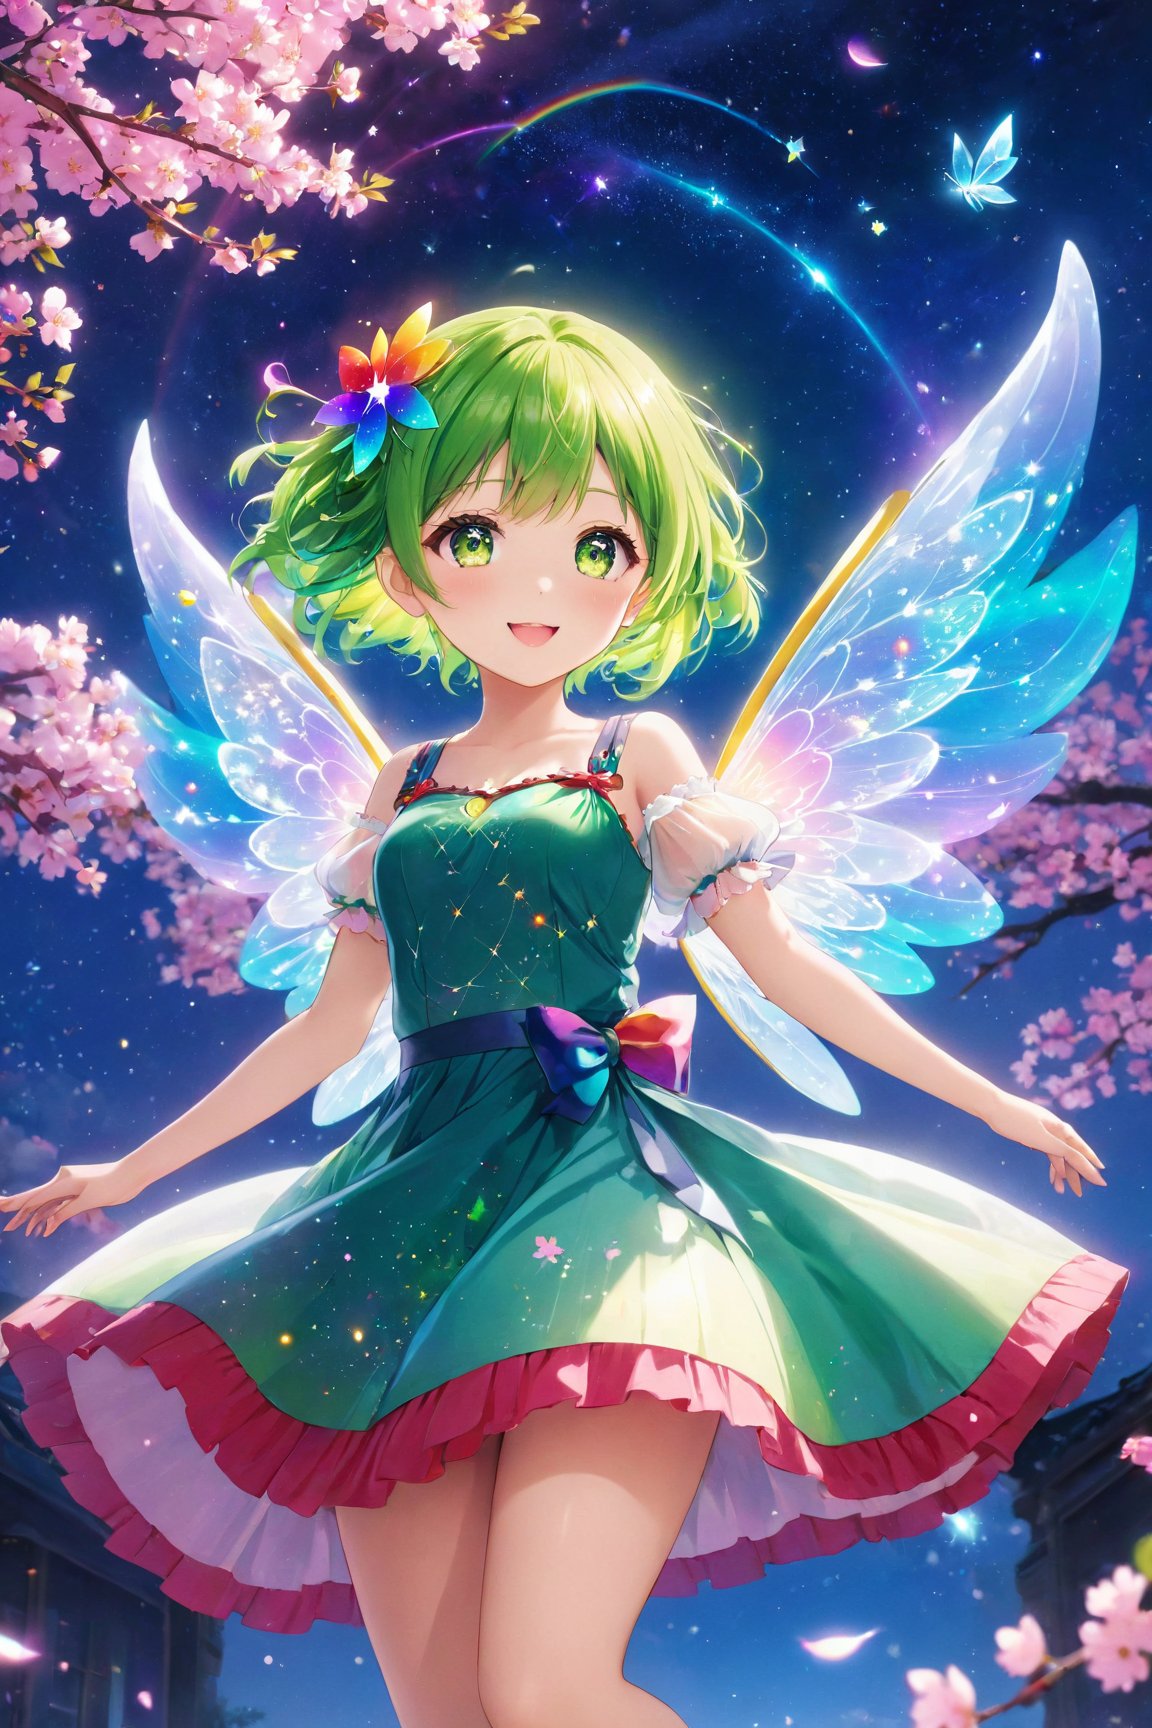 (best quality,4k,8k,highres,masterpiece:1.2),ultra-detailed,(realistic,photorealistic,photo-realistic:1.37),anime,girl,beautiful detailed eyes,beautiful detailed lips,extremely detailed eyes and face,longeyelashes,green eyes,rainbow hair,sexy smile,sexy dress,vivid colors,lively background,shining rainbow colors,soft lighting,sparkling eyes,colored hair strands,expressive body language,charming pose,cute and stylish outfit,playful atmosphere,manga style,fantasy elements,constellation patterns,floating cherry blossoms,fairy wings,magical aura,anime-like girl with vibrant colors,emitting cheerful energy,subtle blush,natural beauty,graceful movements